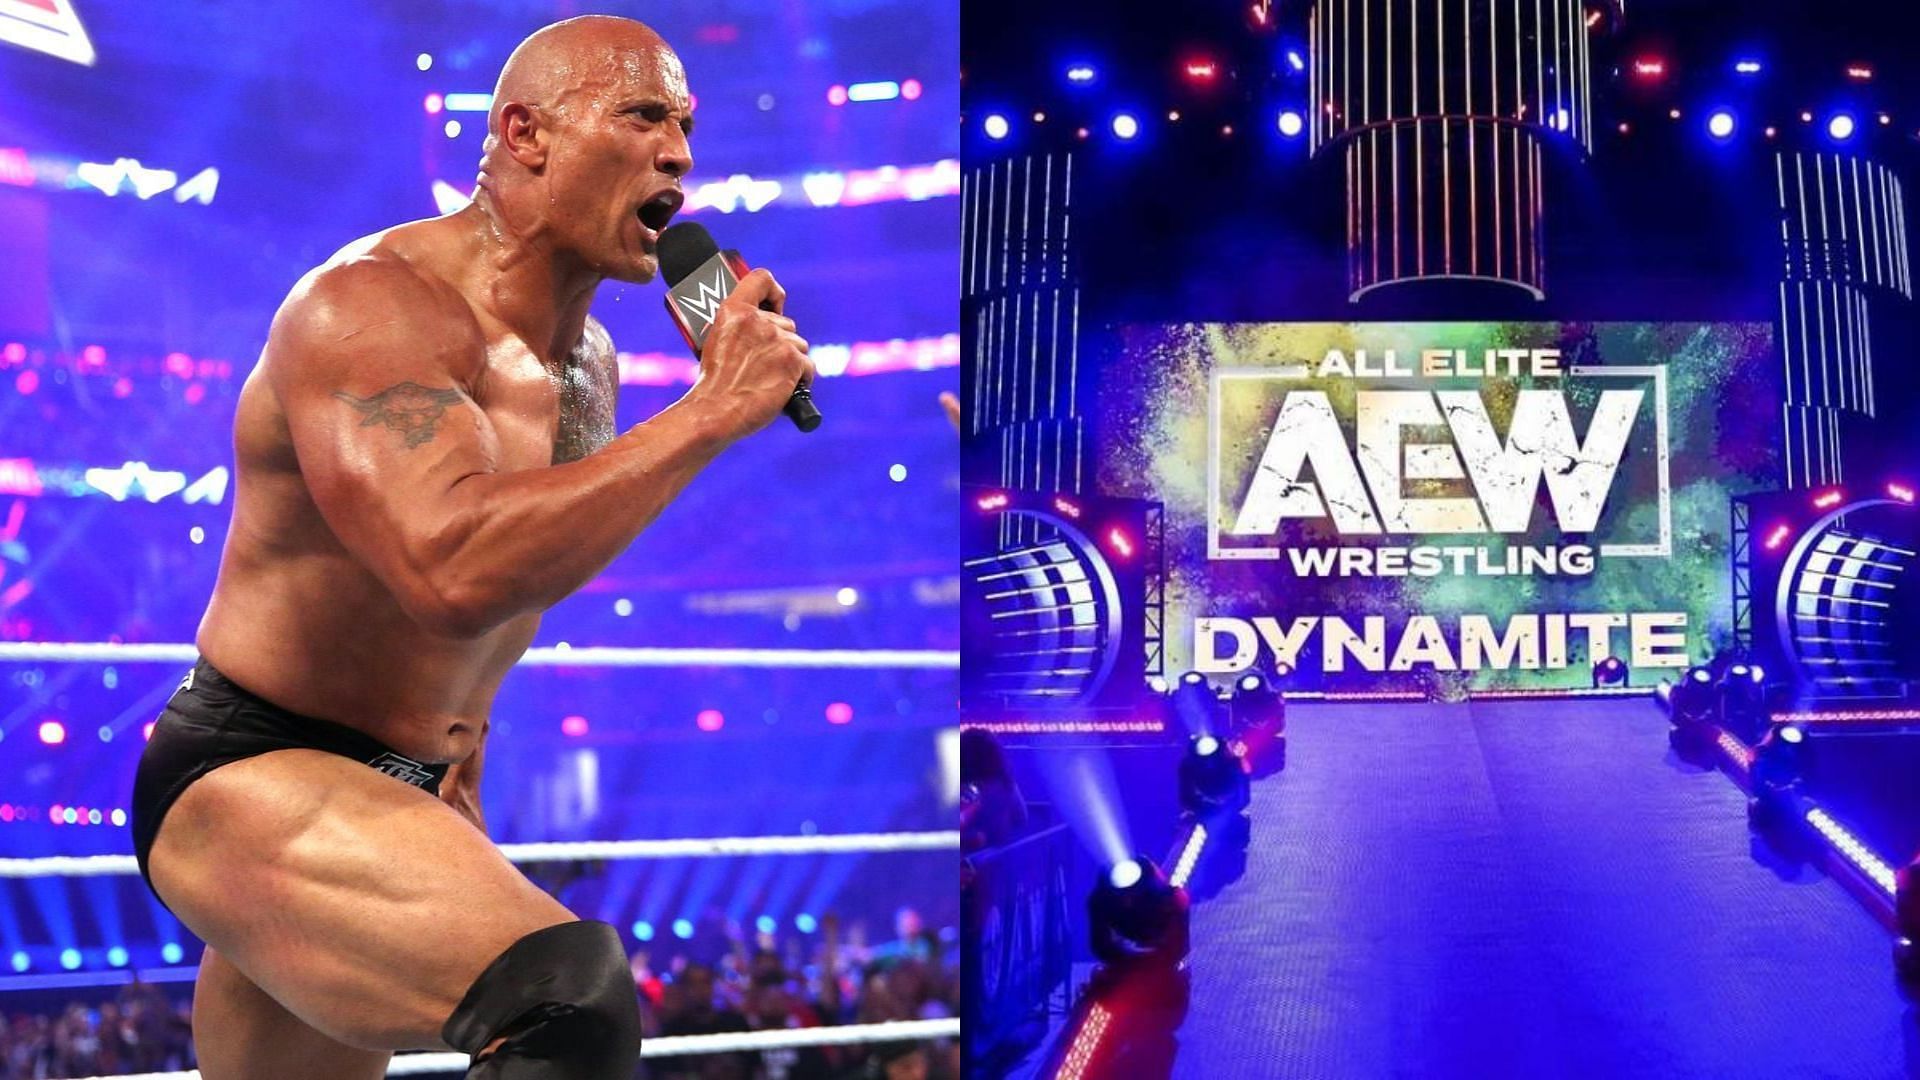 The Rock was called out by a popular AEW star